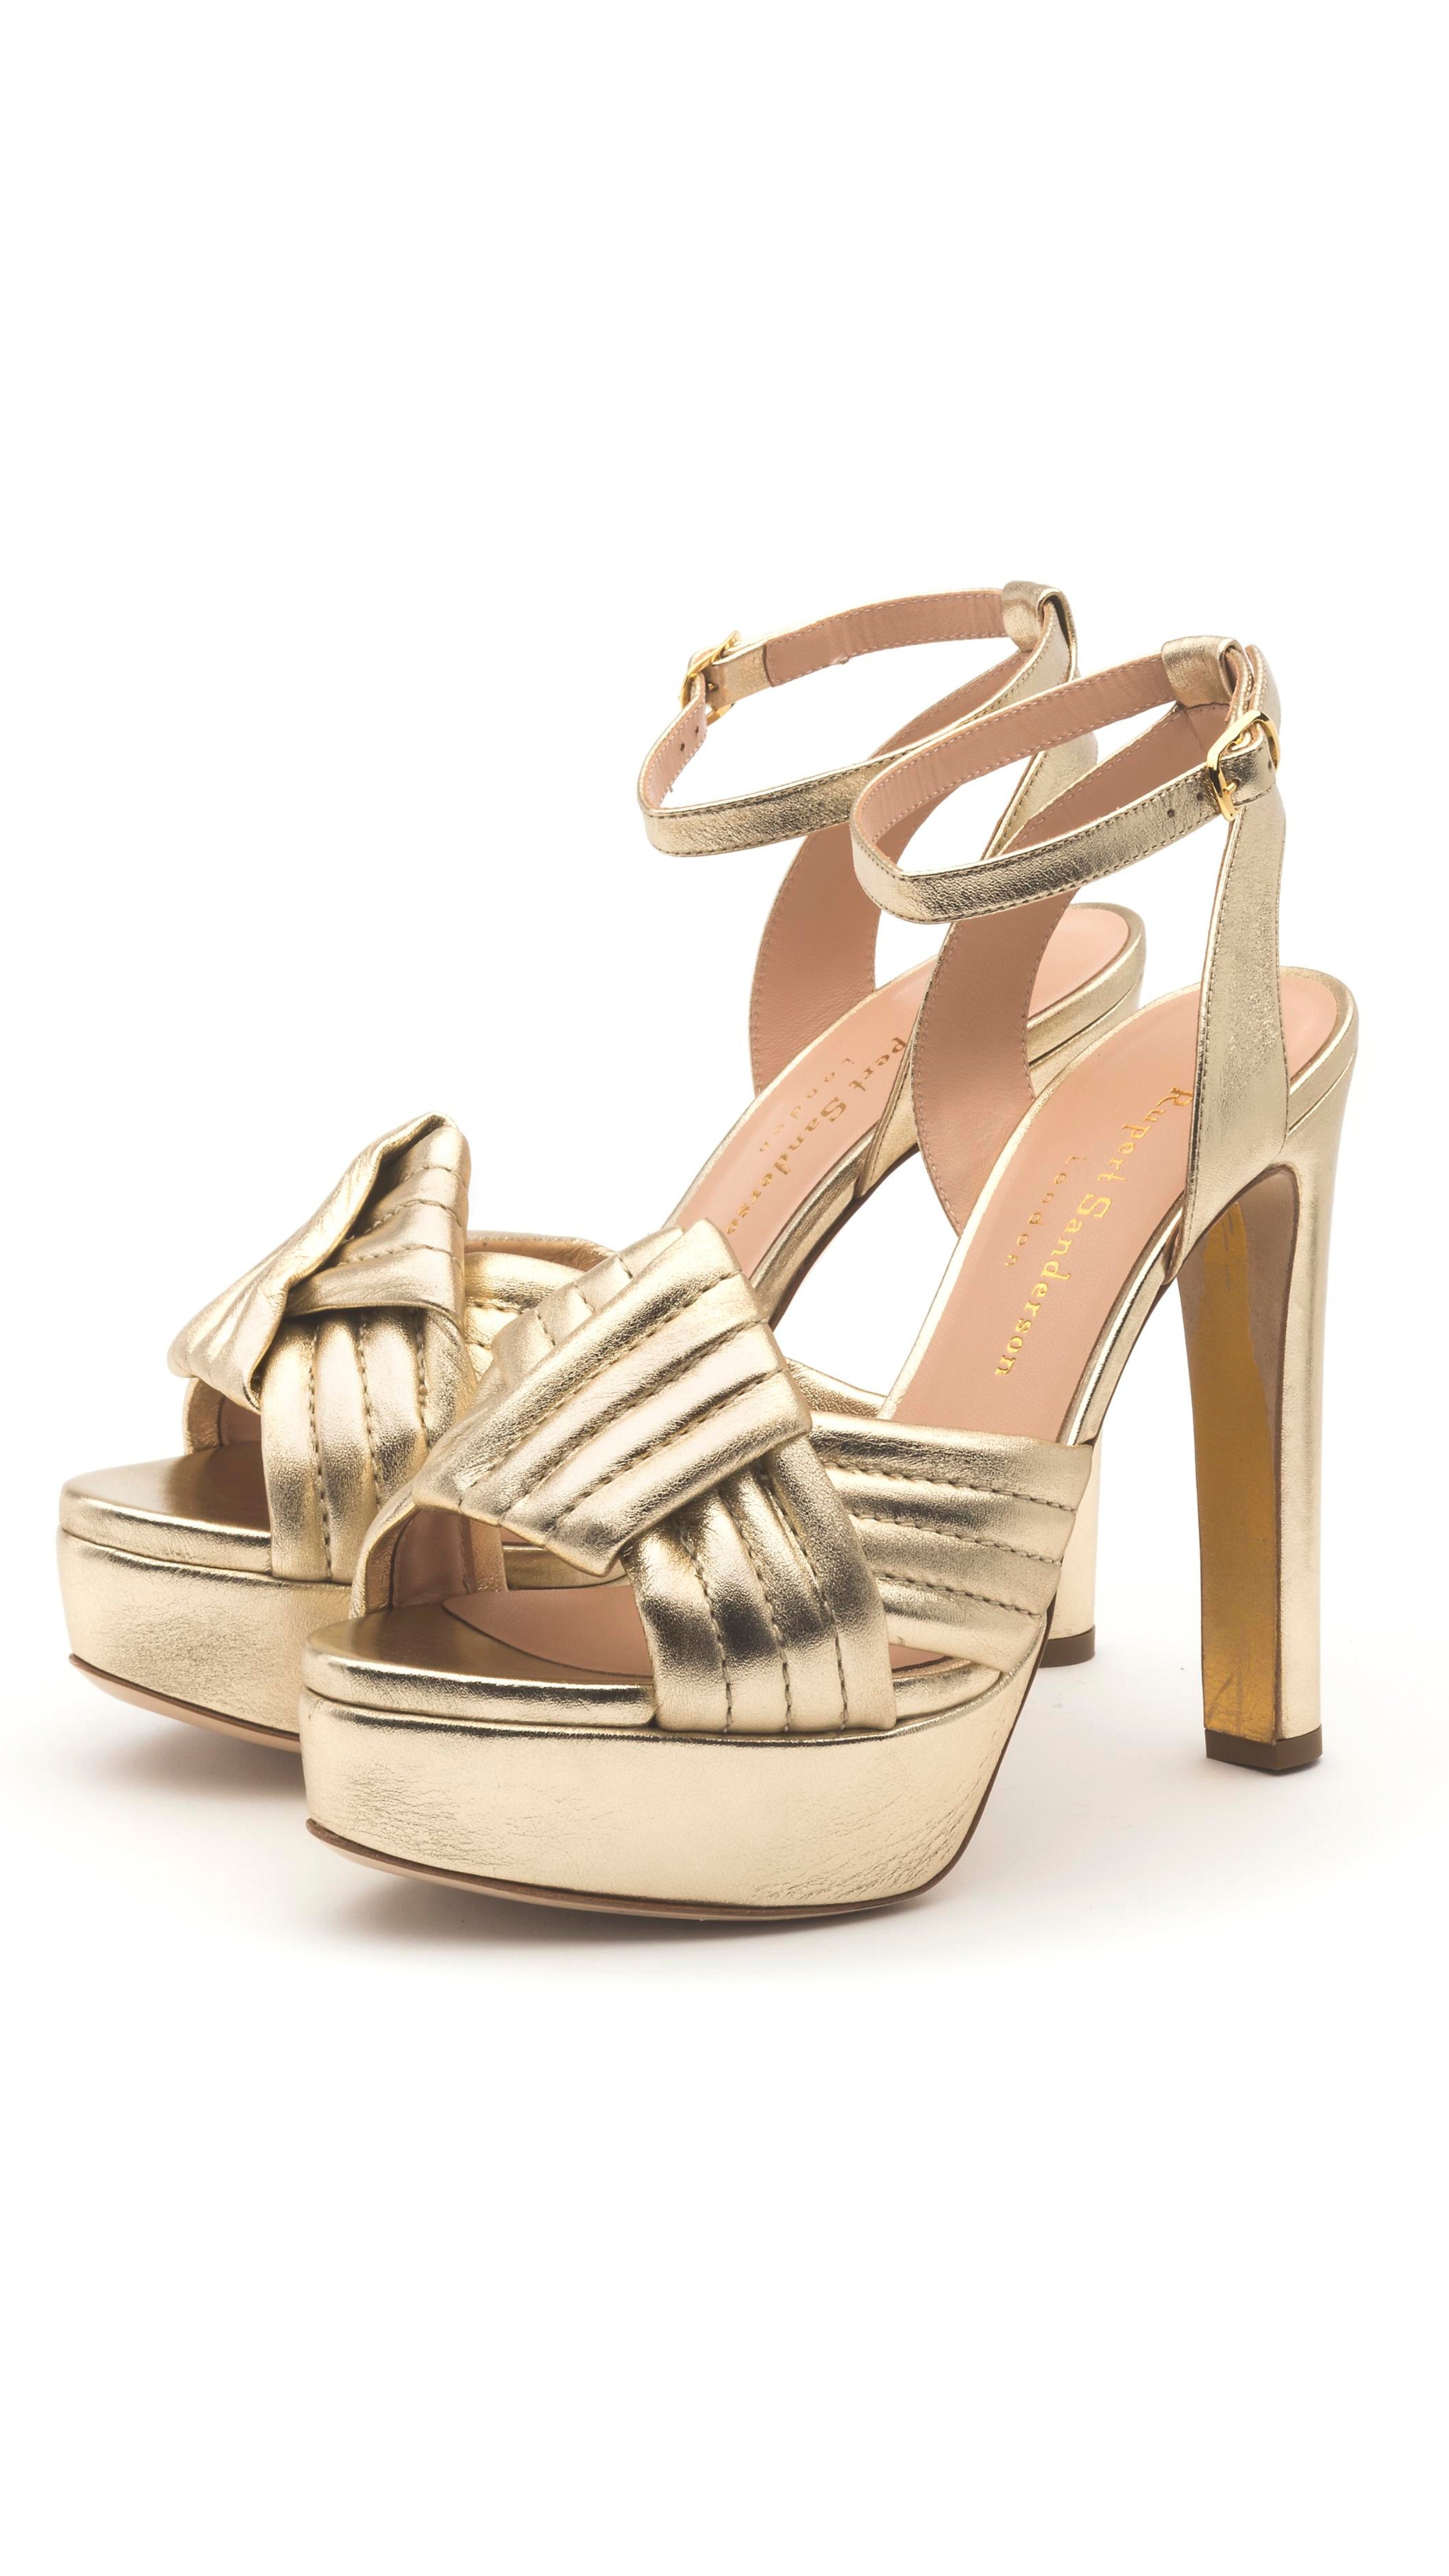 Rupert Sanderson, The Hellcat Heel Crafted in the highest quality Italian Nappa leather and complemented by a woven geometric pattern across the toes in a soft metallic gold color. The platform soles and ankle straps provide a secure fit to comfortably wear the 10cm heel.  Both shoes shown from the front side angle.